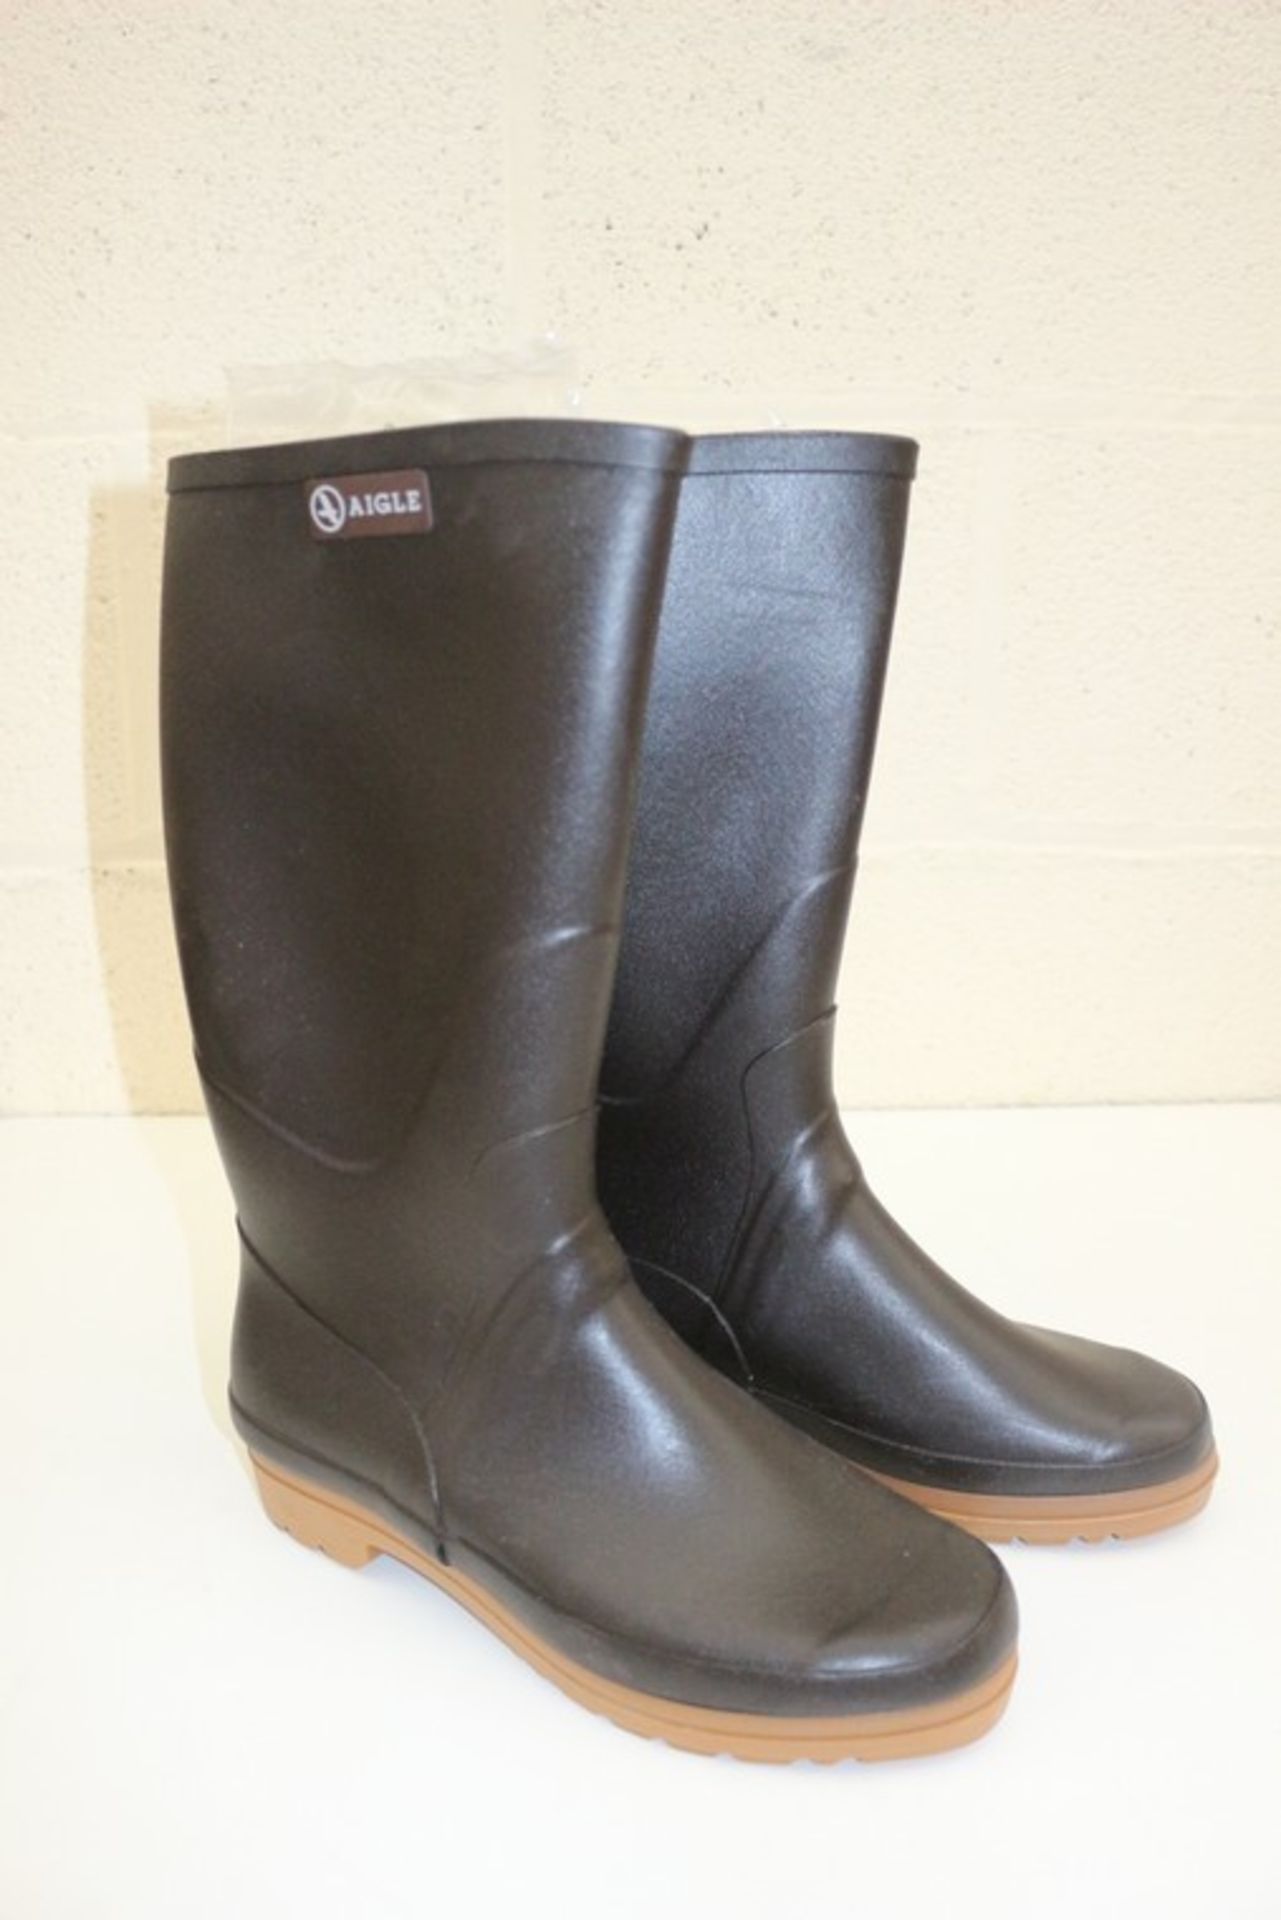 1 x BRAND NEW PAIR OF AIGLE PARCOUR GENTS DESIGNER WELLINGTON BOOTS RRP £150 *PLEASE NOTE THAT THE